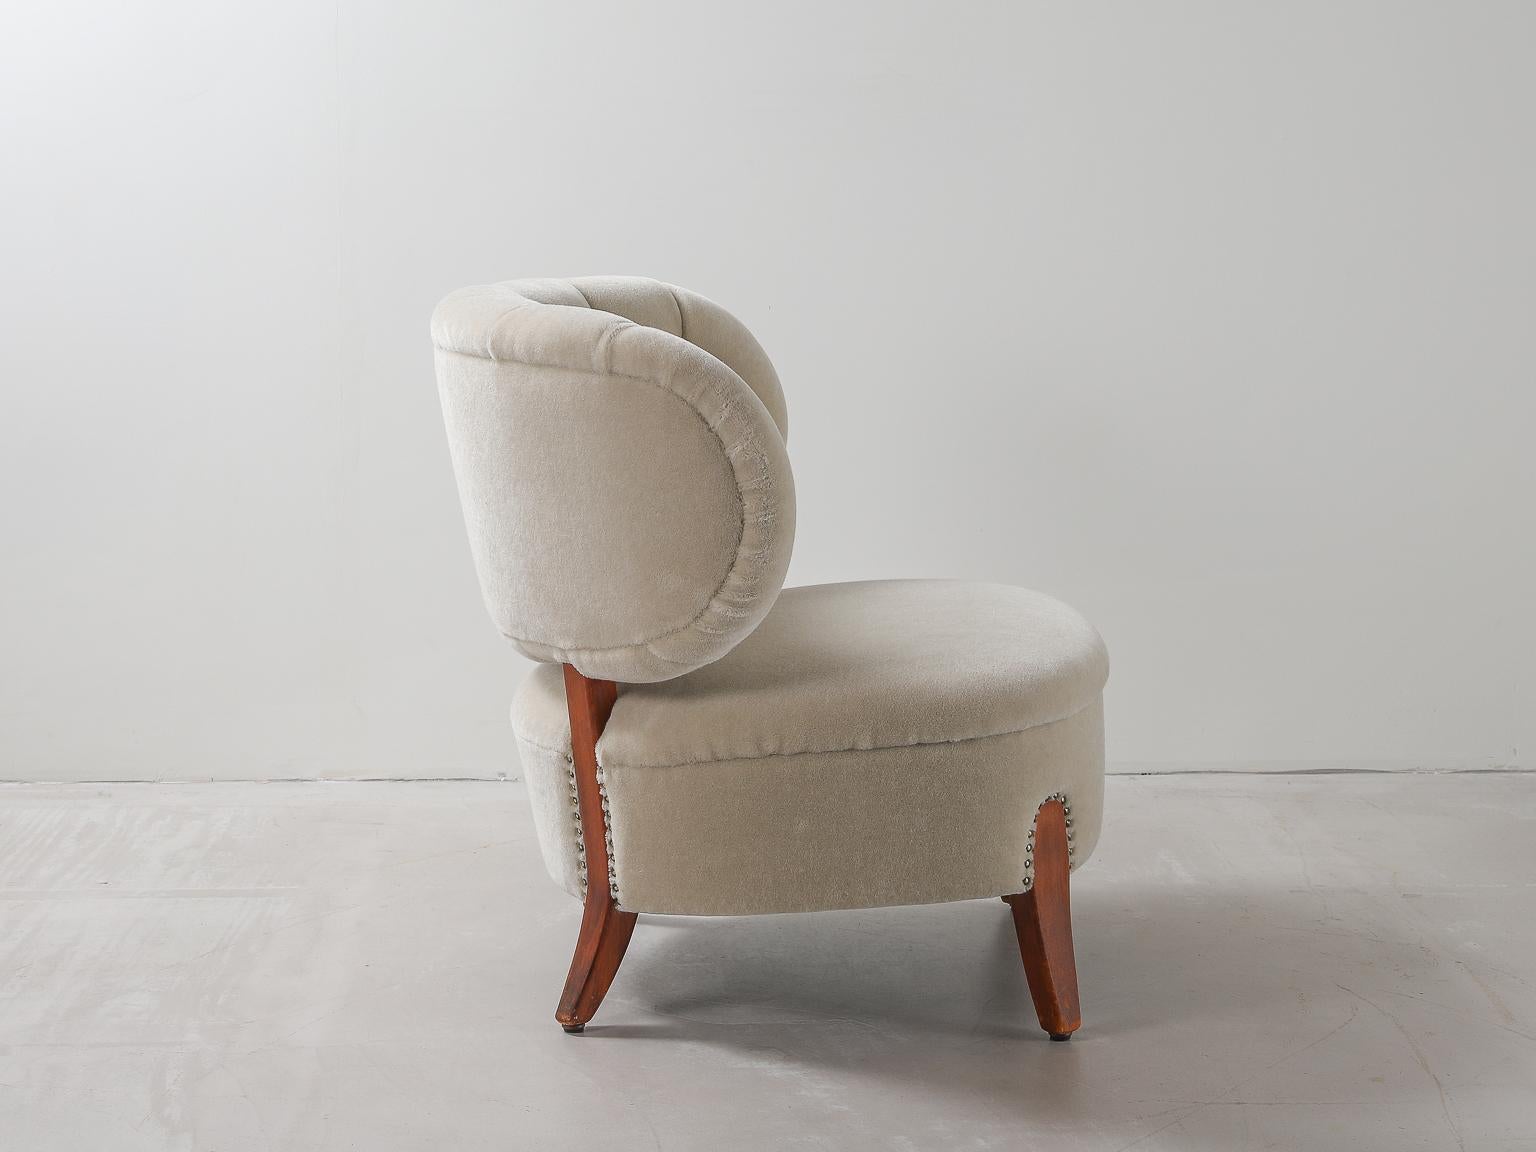 Swedish Armchair by Otto Schulz 1930s-1940s Upholstered in Bespoke Mohair